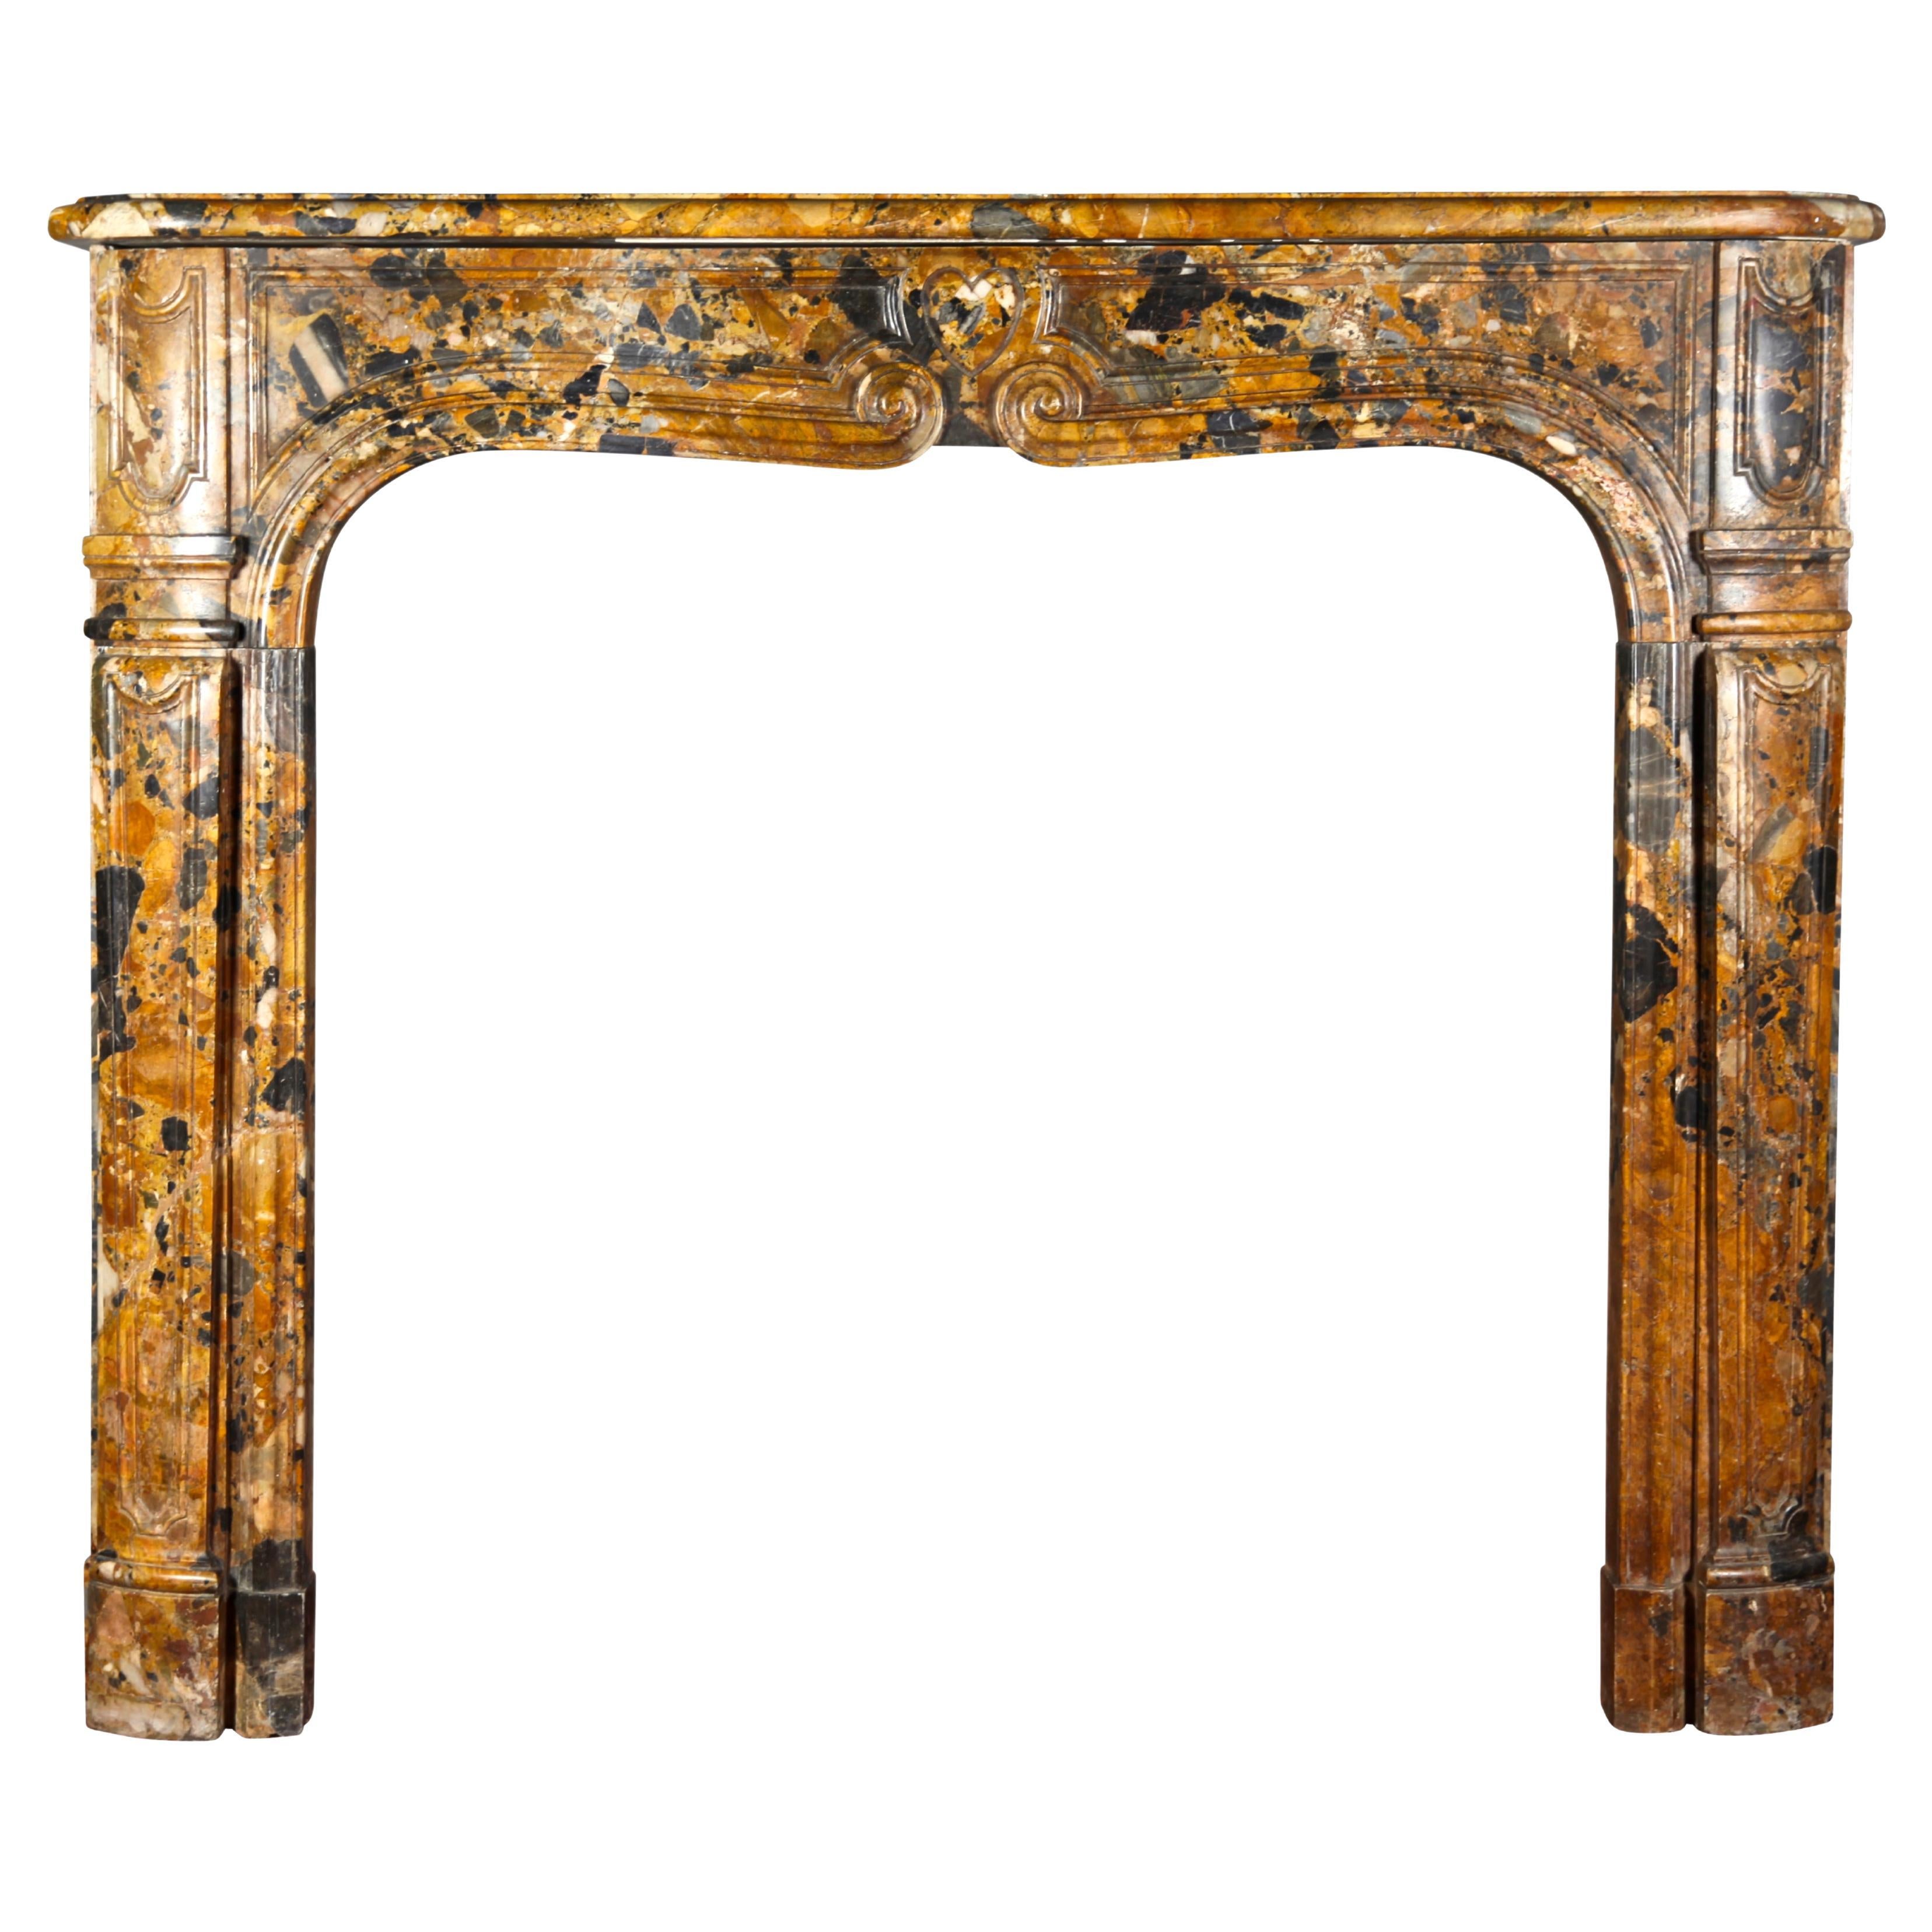 Small 18th Century Italian Original Antique Marble Fireplace Surround For Sale